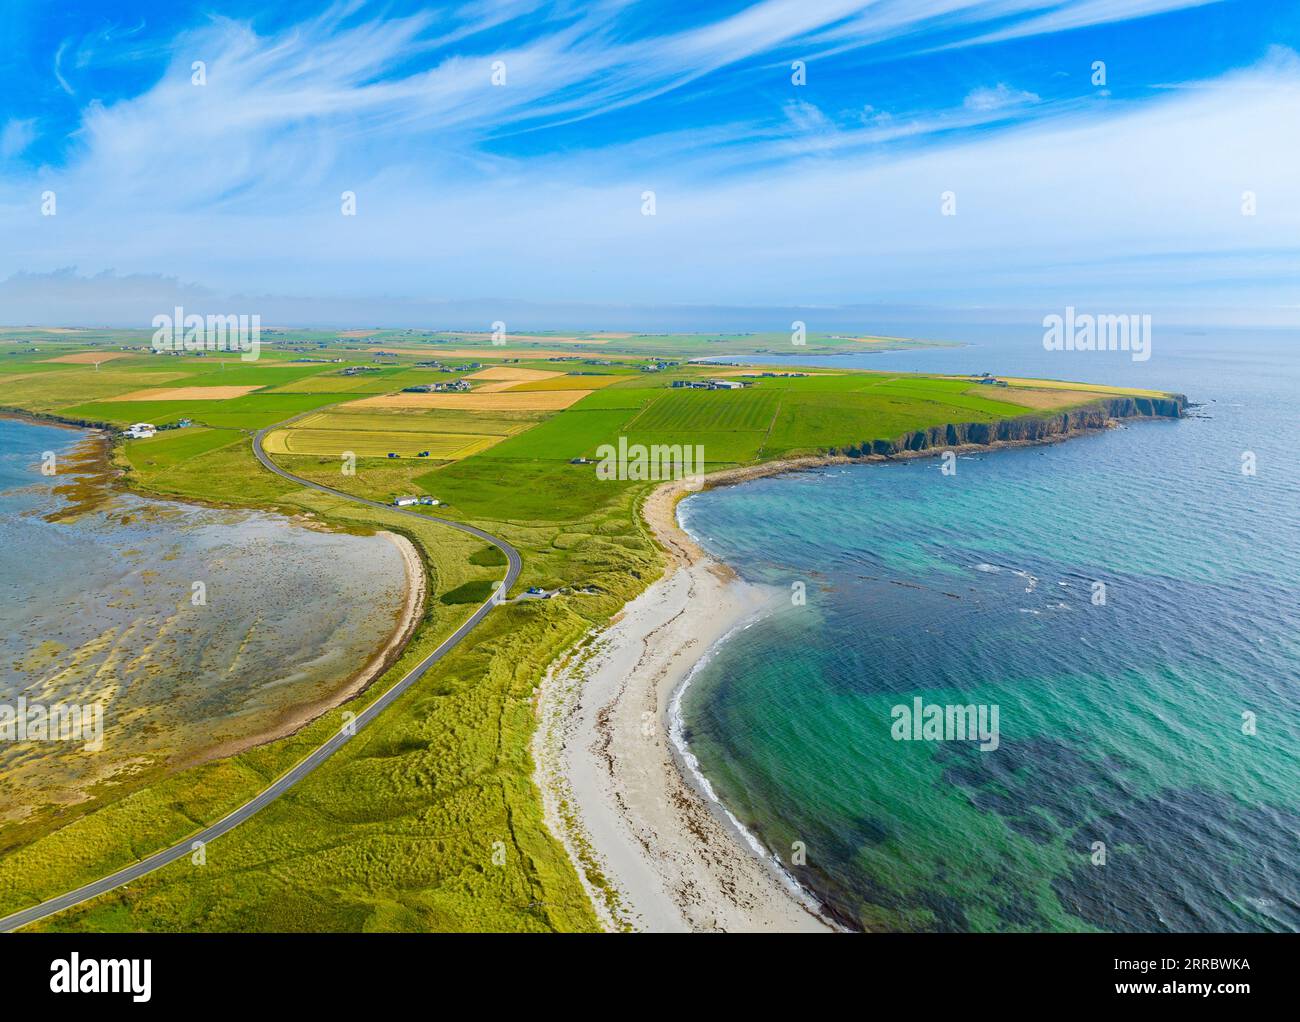 Aerial view of beaches at Taracliff Bay and Peter’s Pool at Sandi Sands on East Mainland, Upper Sanday, Orkney Islands, Scotland, UK. Stock Photo